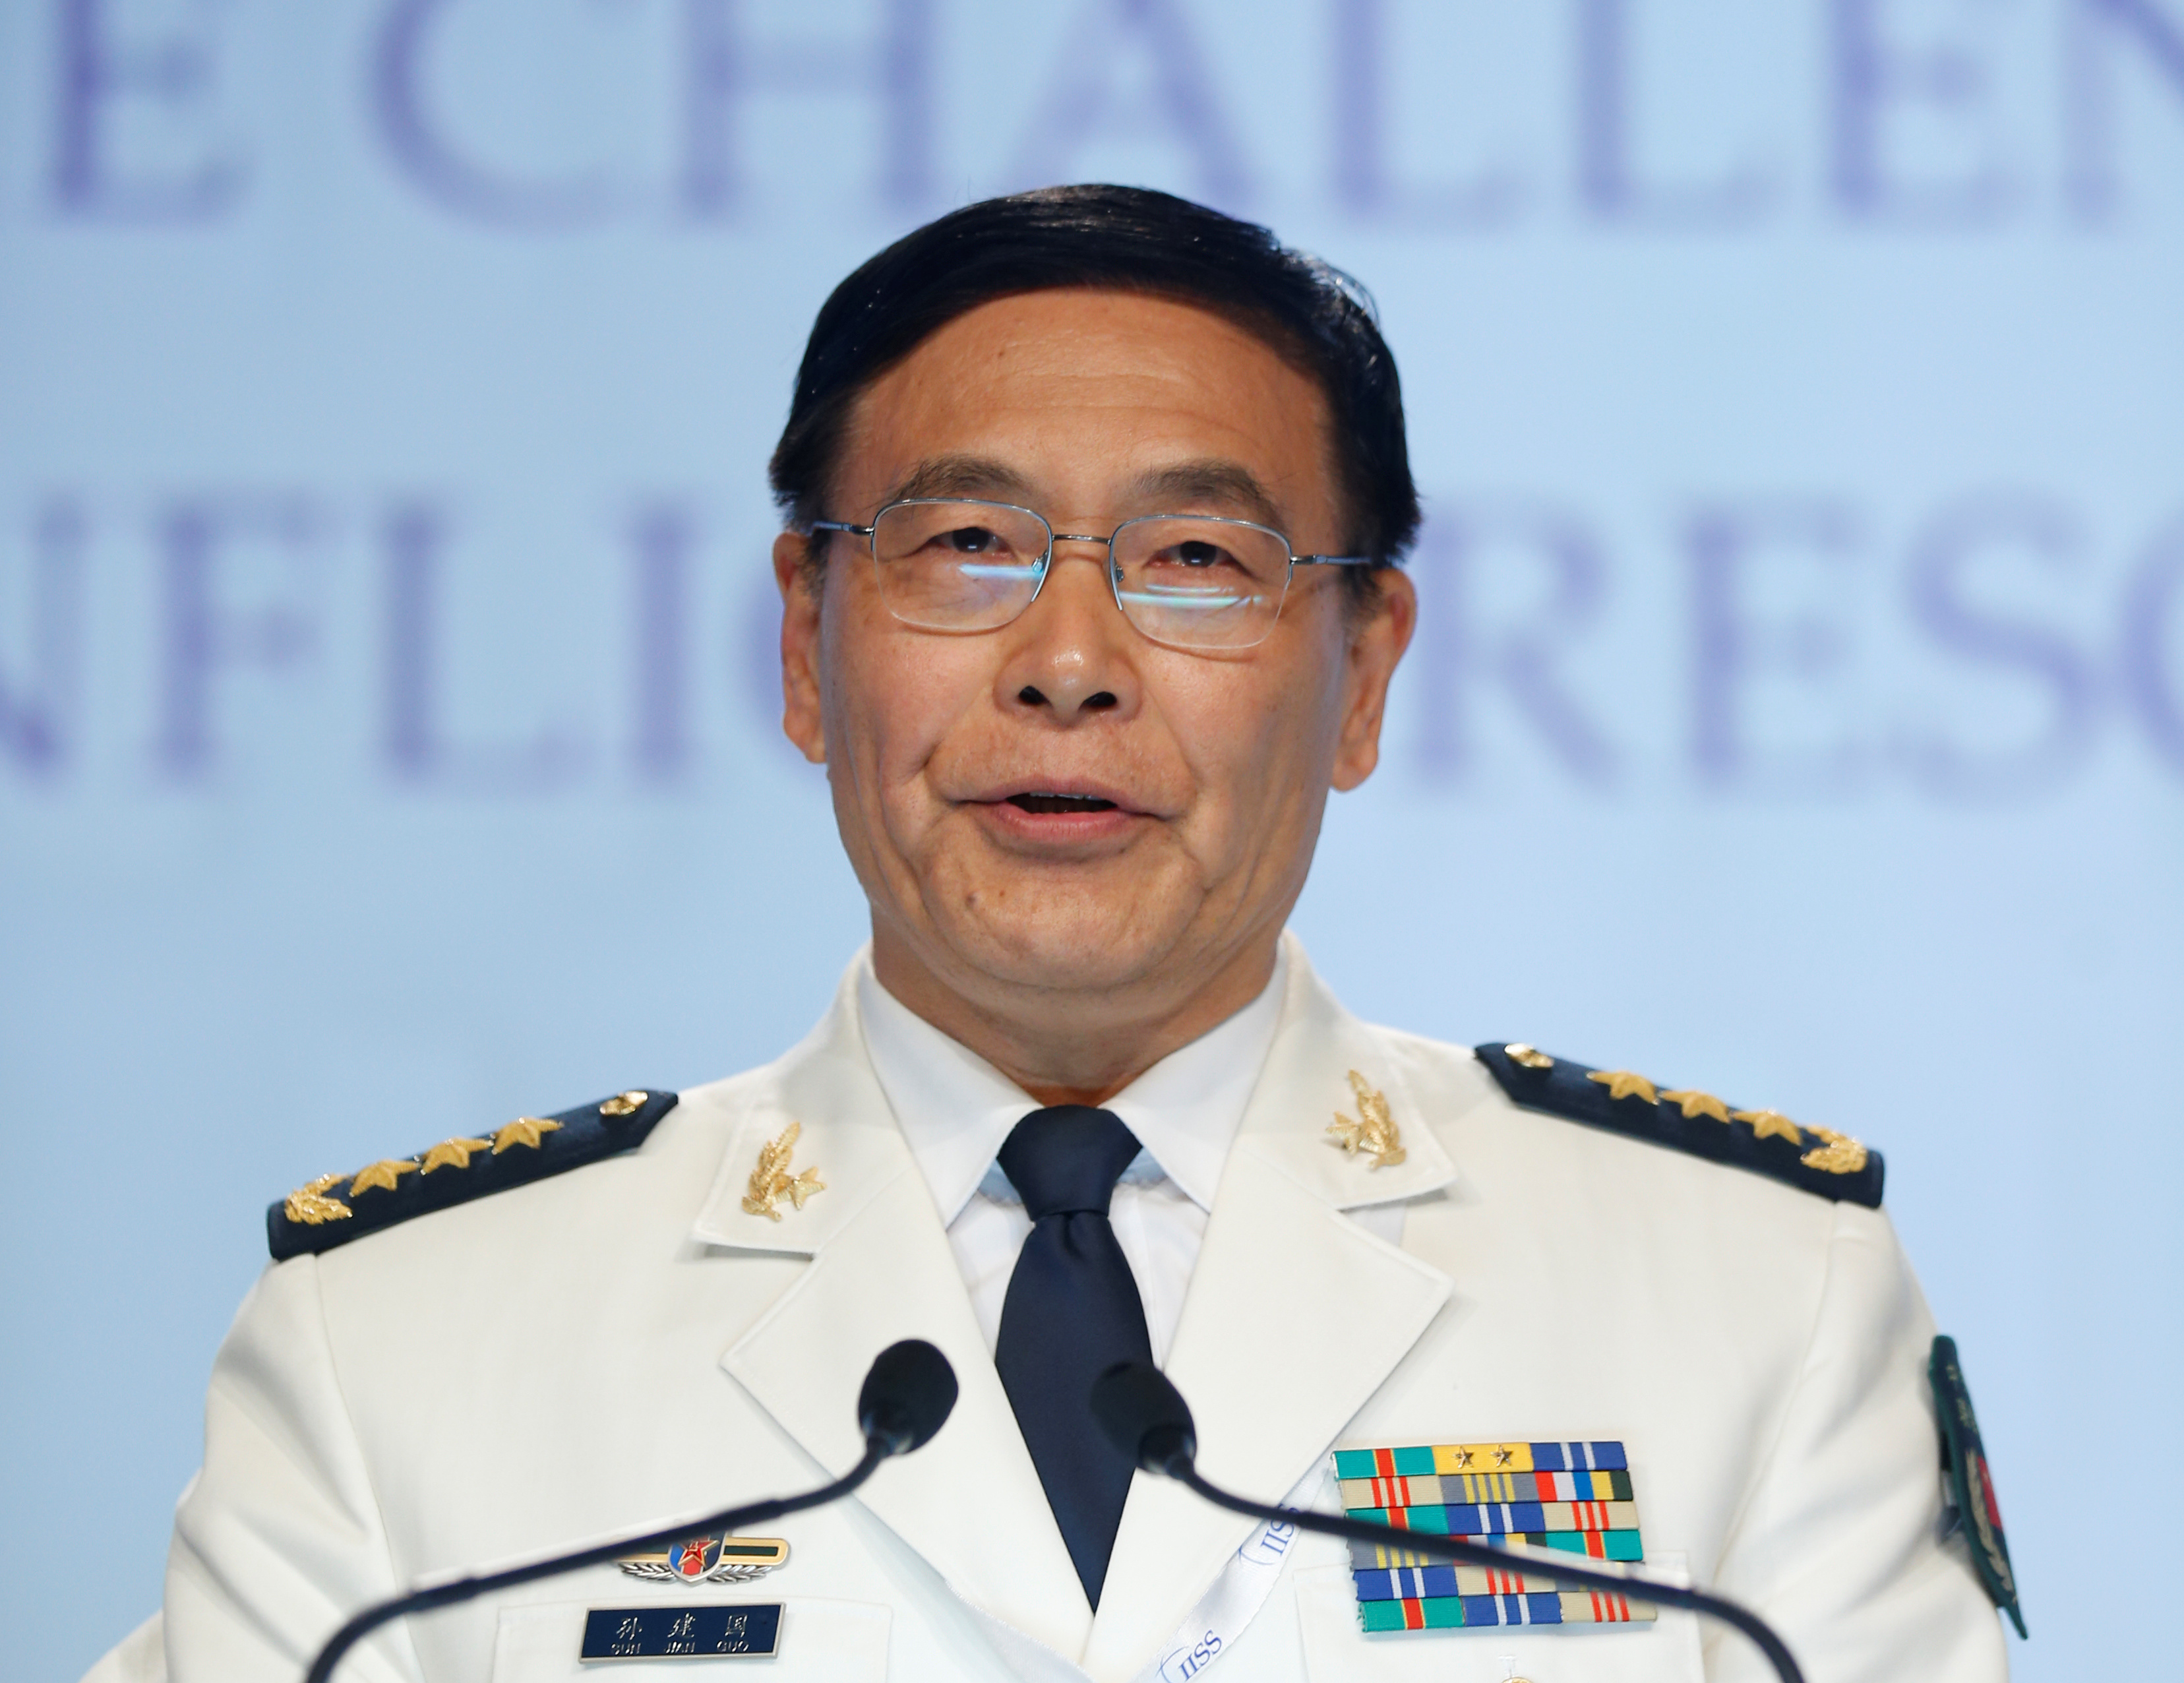 China's Joint Staff Department Deputy Chief Admiral Sun Jianguo speaks at the IISS Shangri-La Dialogue in Singapore June 5, 2016 (Edgar Su—Reuters)